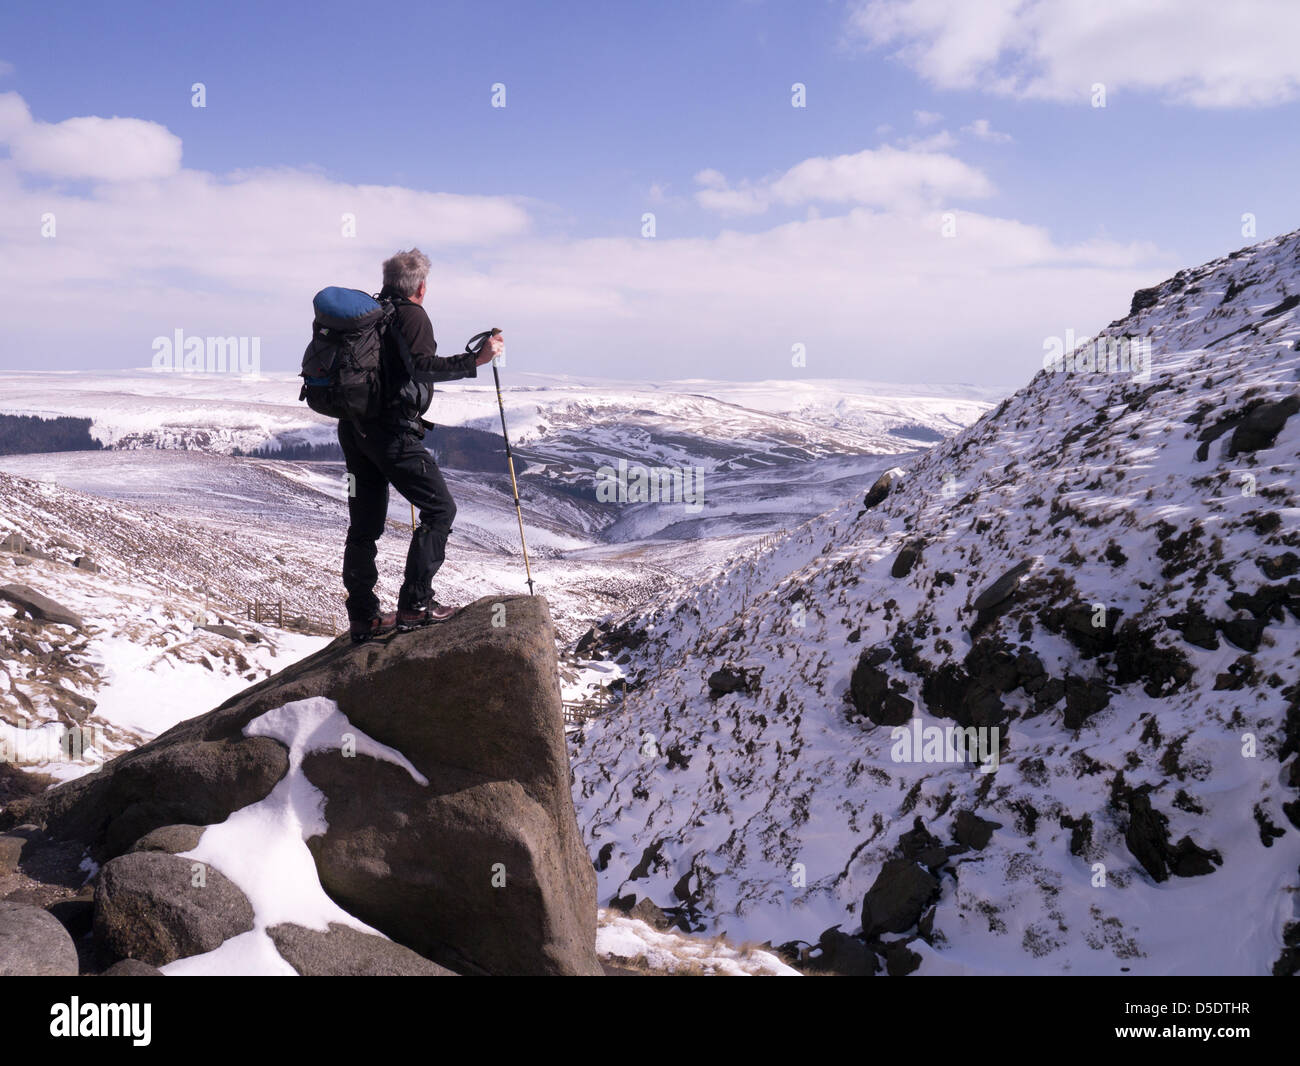 Peak District National Park, Derbyshire,UK. 29th March, 2013. A walker at the top of Fairbrook on the edge of Kinder Scout in the Peak District National Park, Derbyshire,UK. Winter continues in these high hills. Credit: Eric Murphy/Alamy Live News Stock Photo